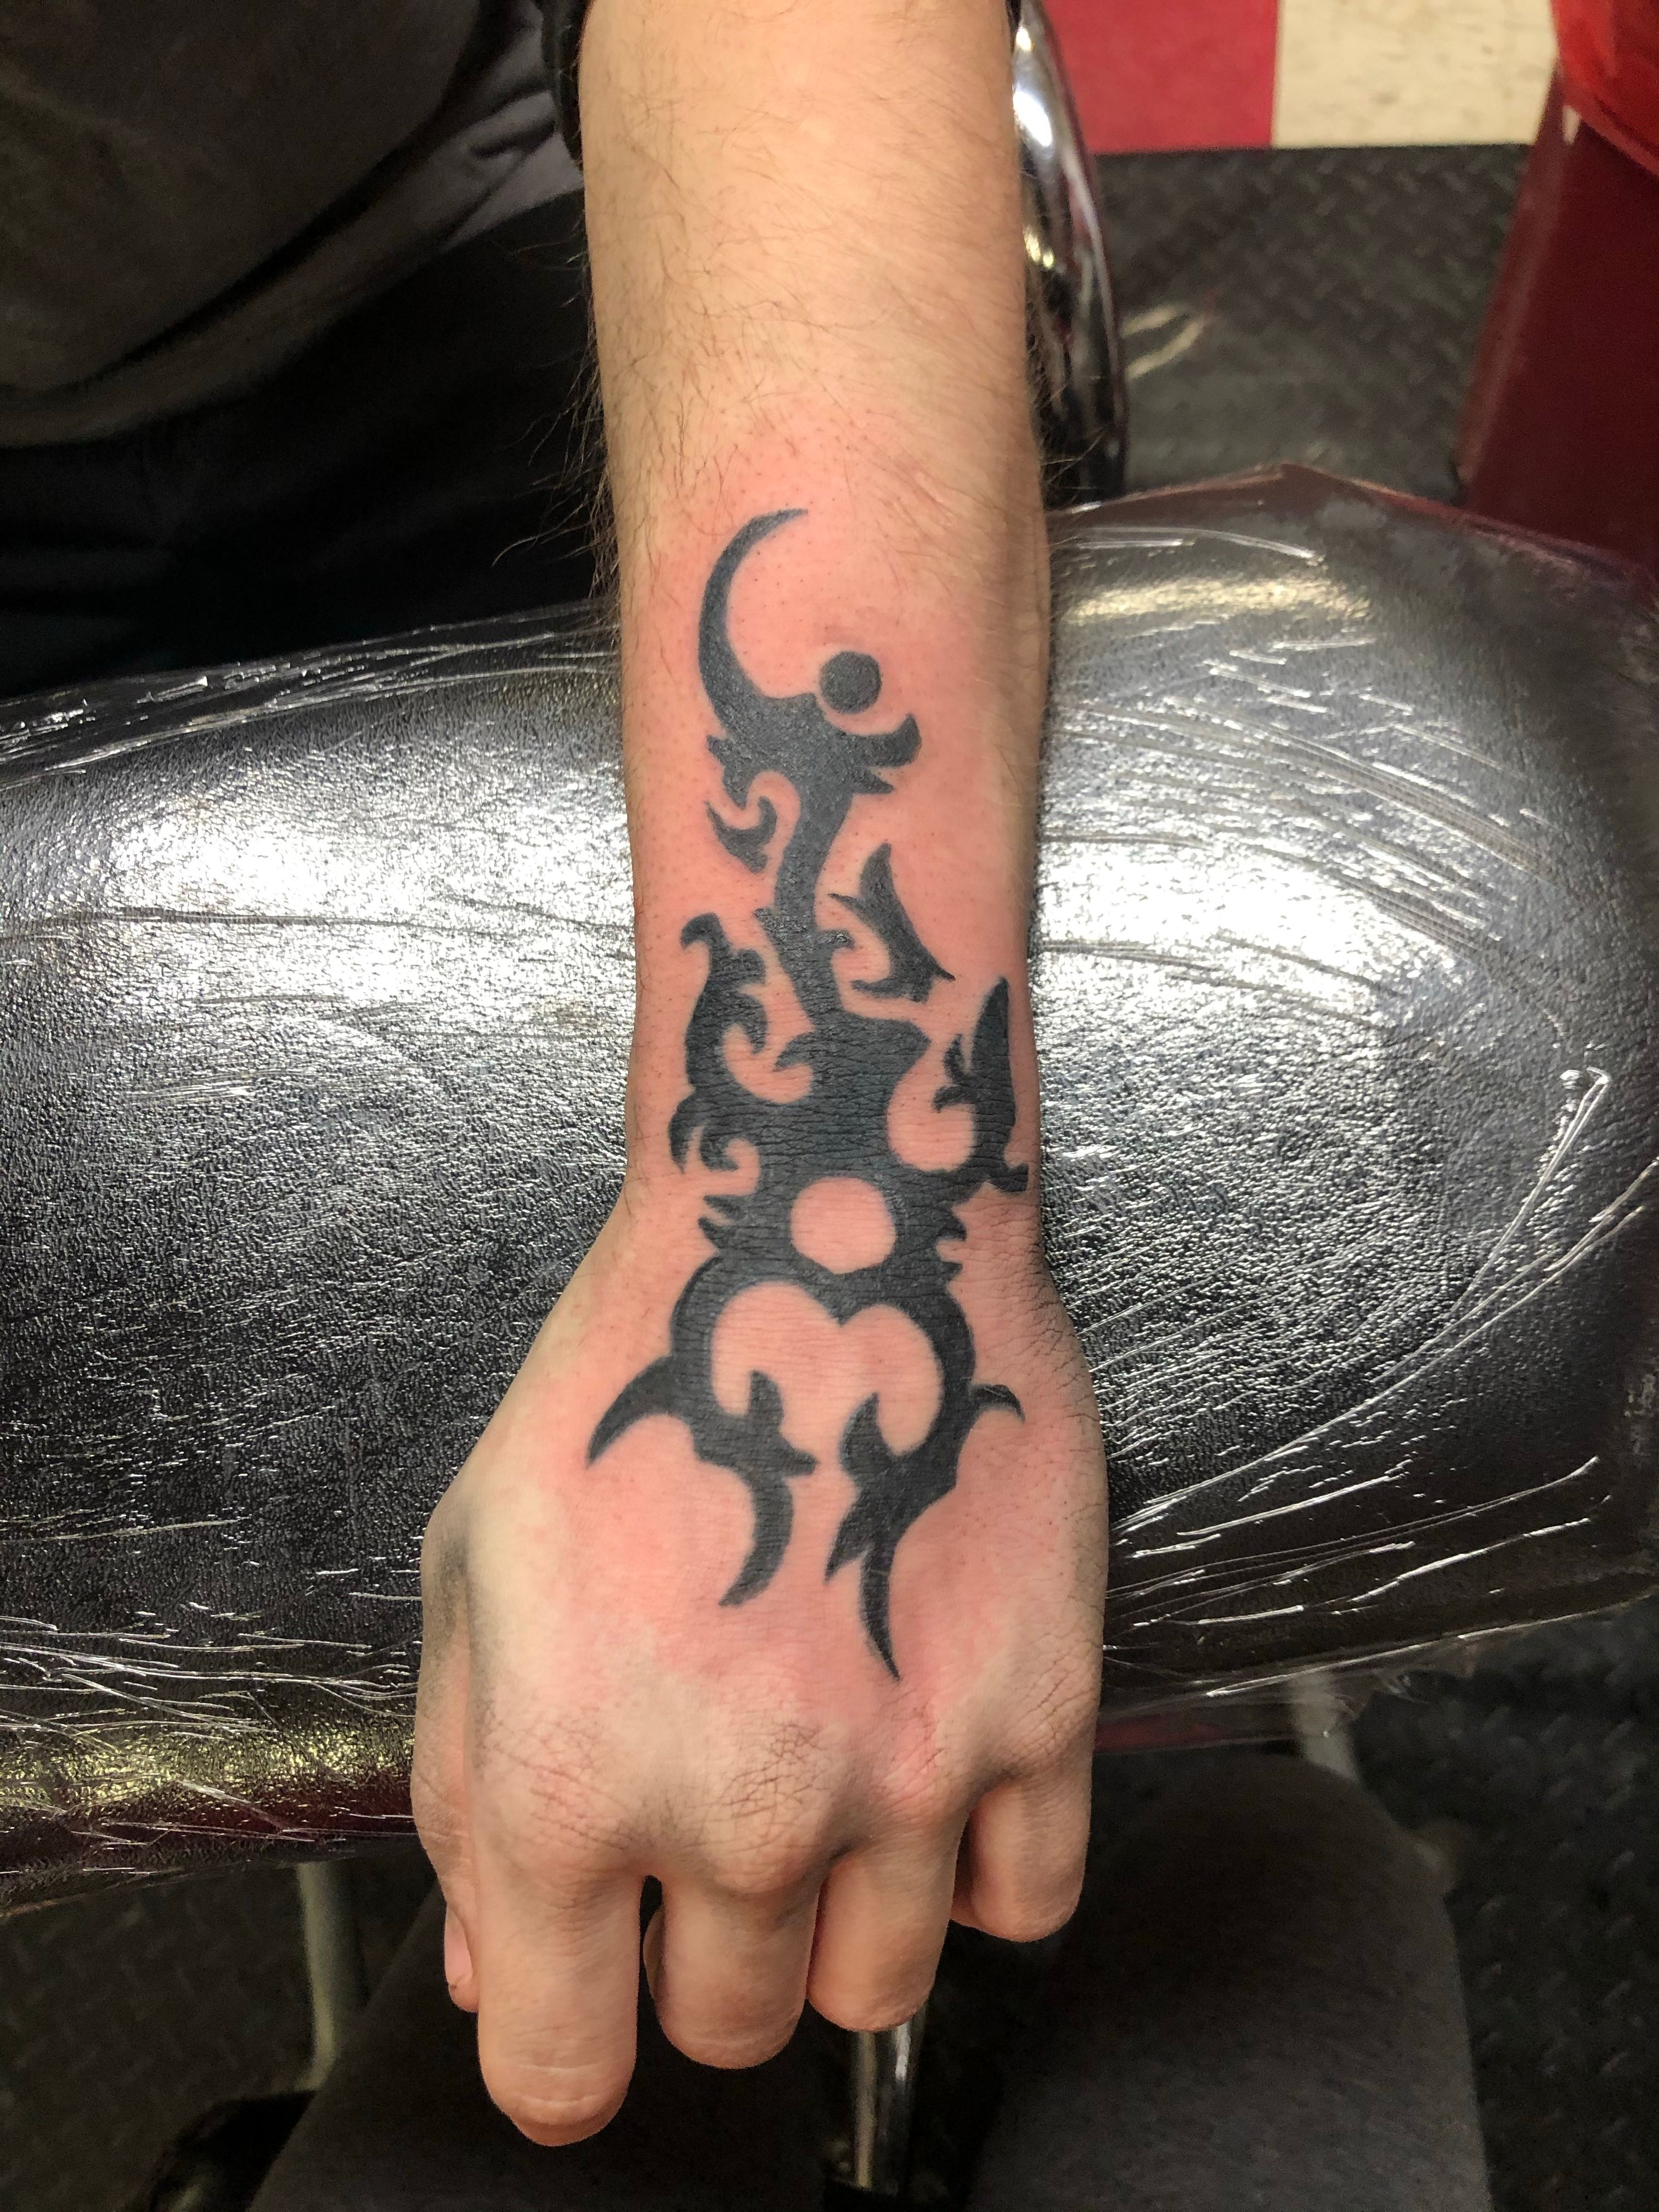 i got jesses borneo scorpion tattooed as a gift to myself for my 20th  birthday  rbreakingbad